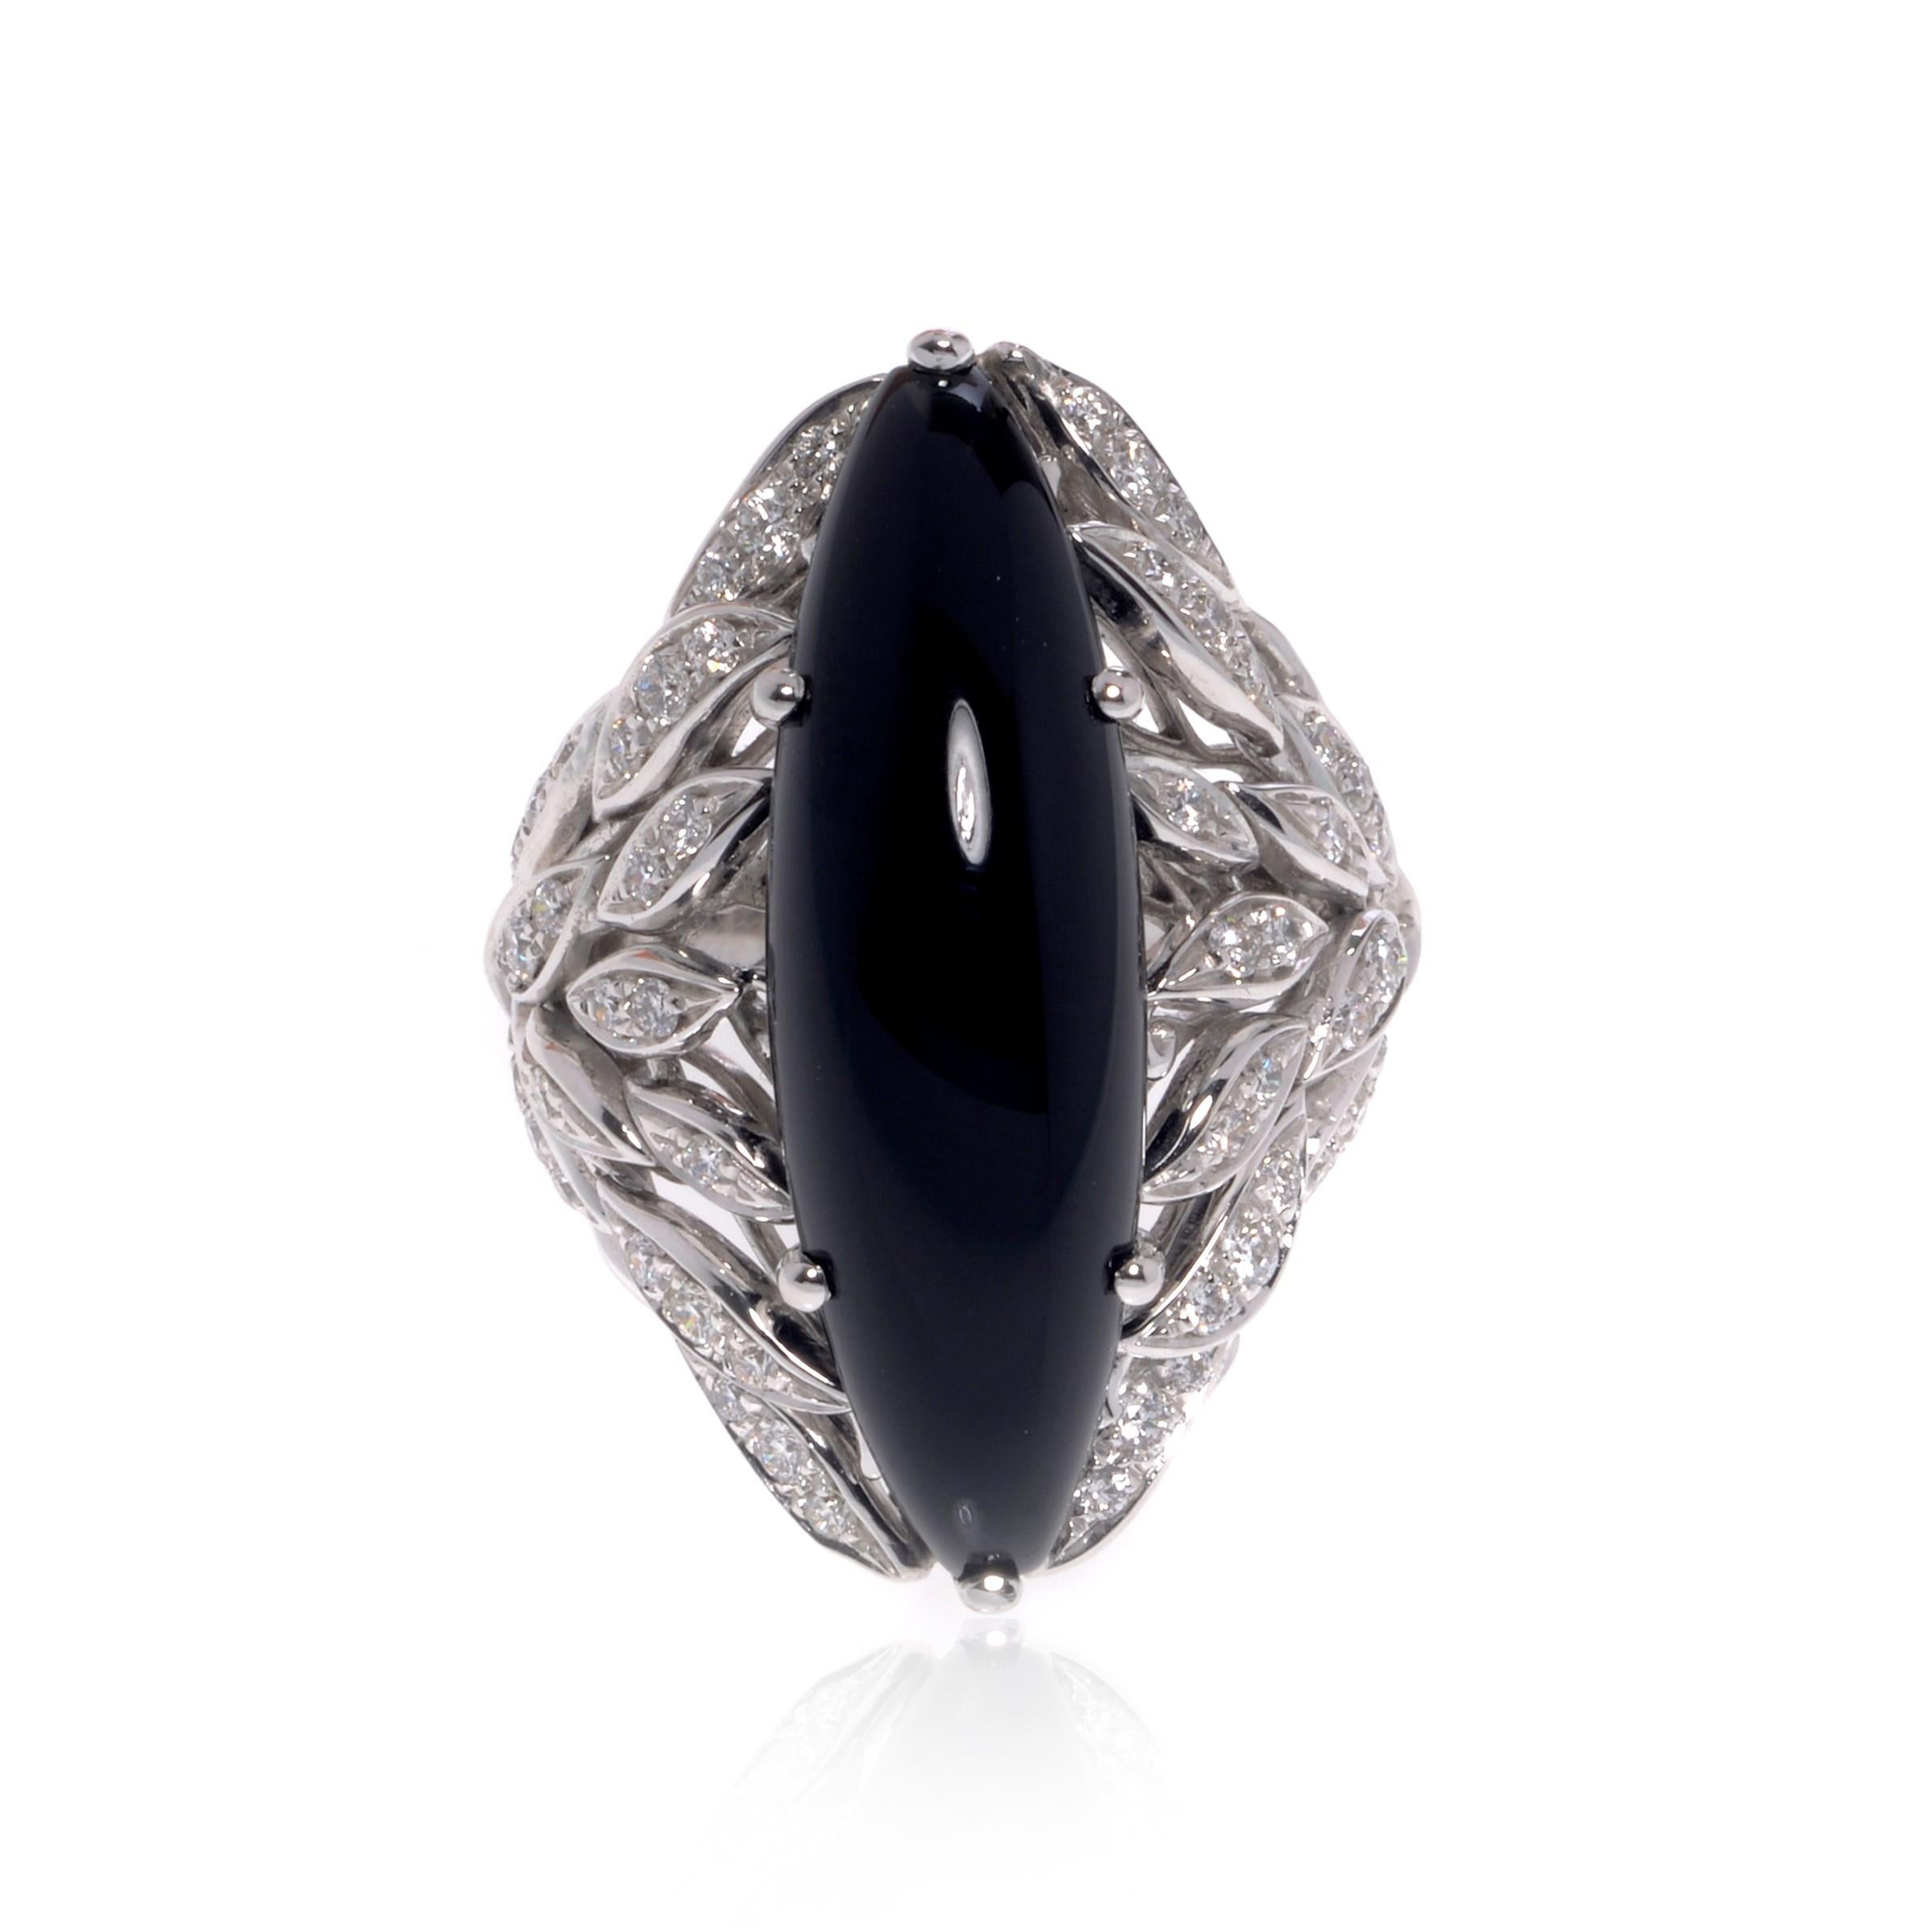 This beautiful cocktail ring features a large natural marquise shape Black Onyx in 18k white gold. Set with 0.79cttw of brilliant cut diamonds. Diamond color G and VVS clarity. Onyx weights 2.40 grams. Ring size 6.5. Top measurements: 32.00mm. Comes